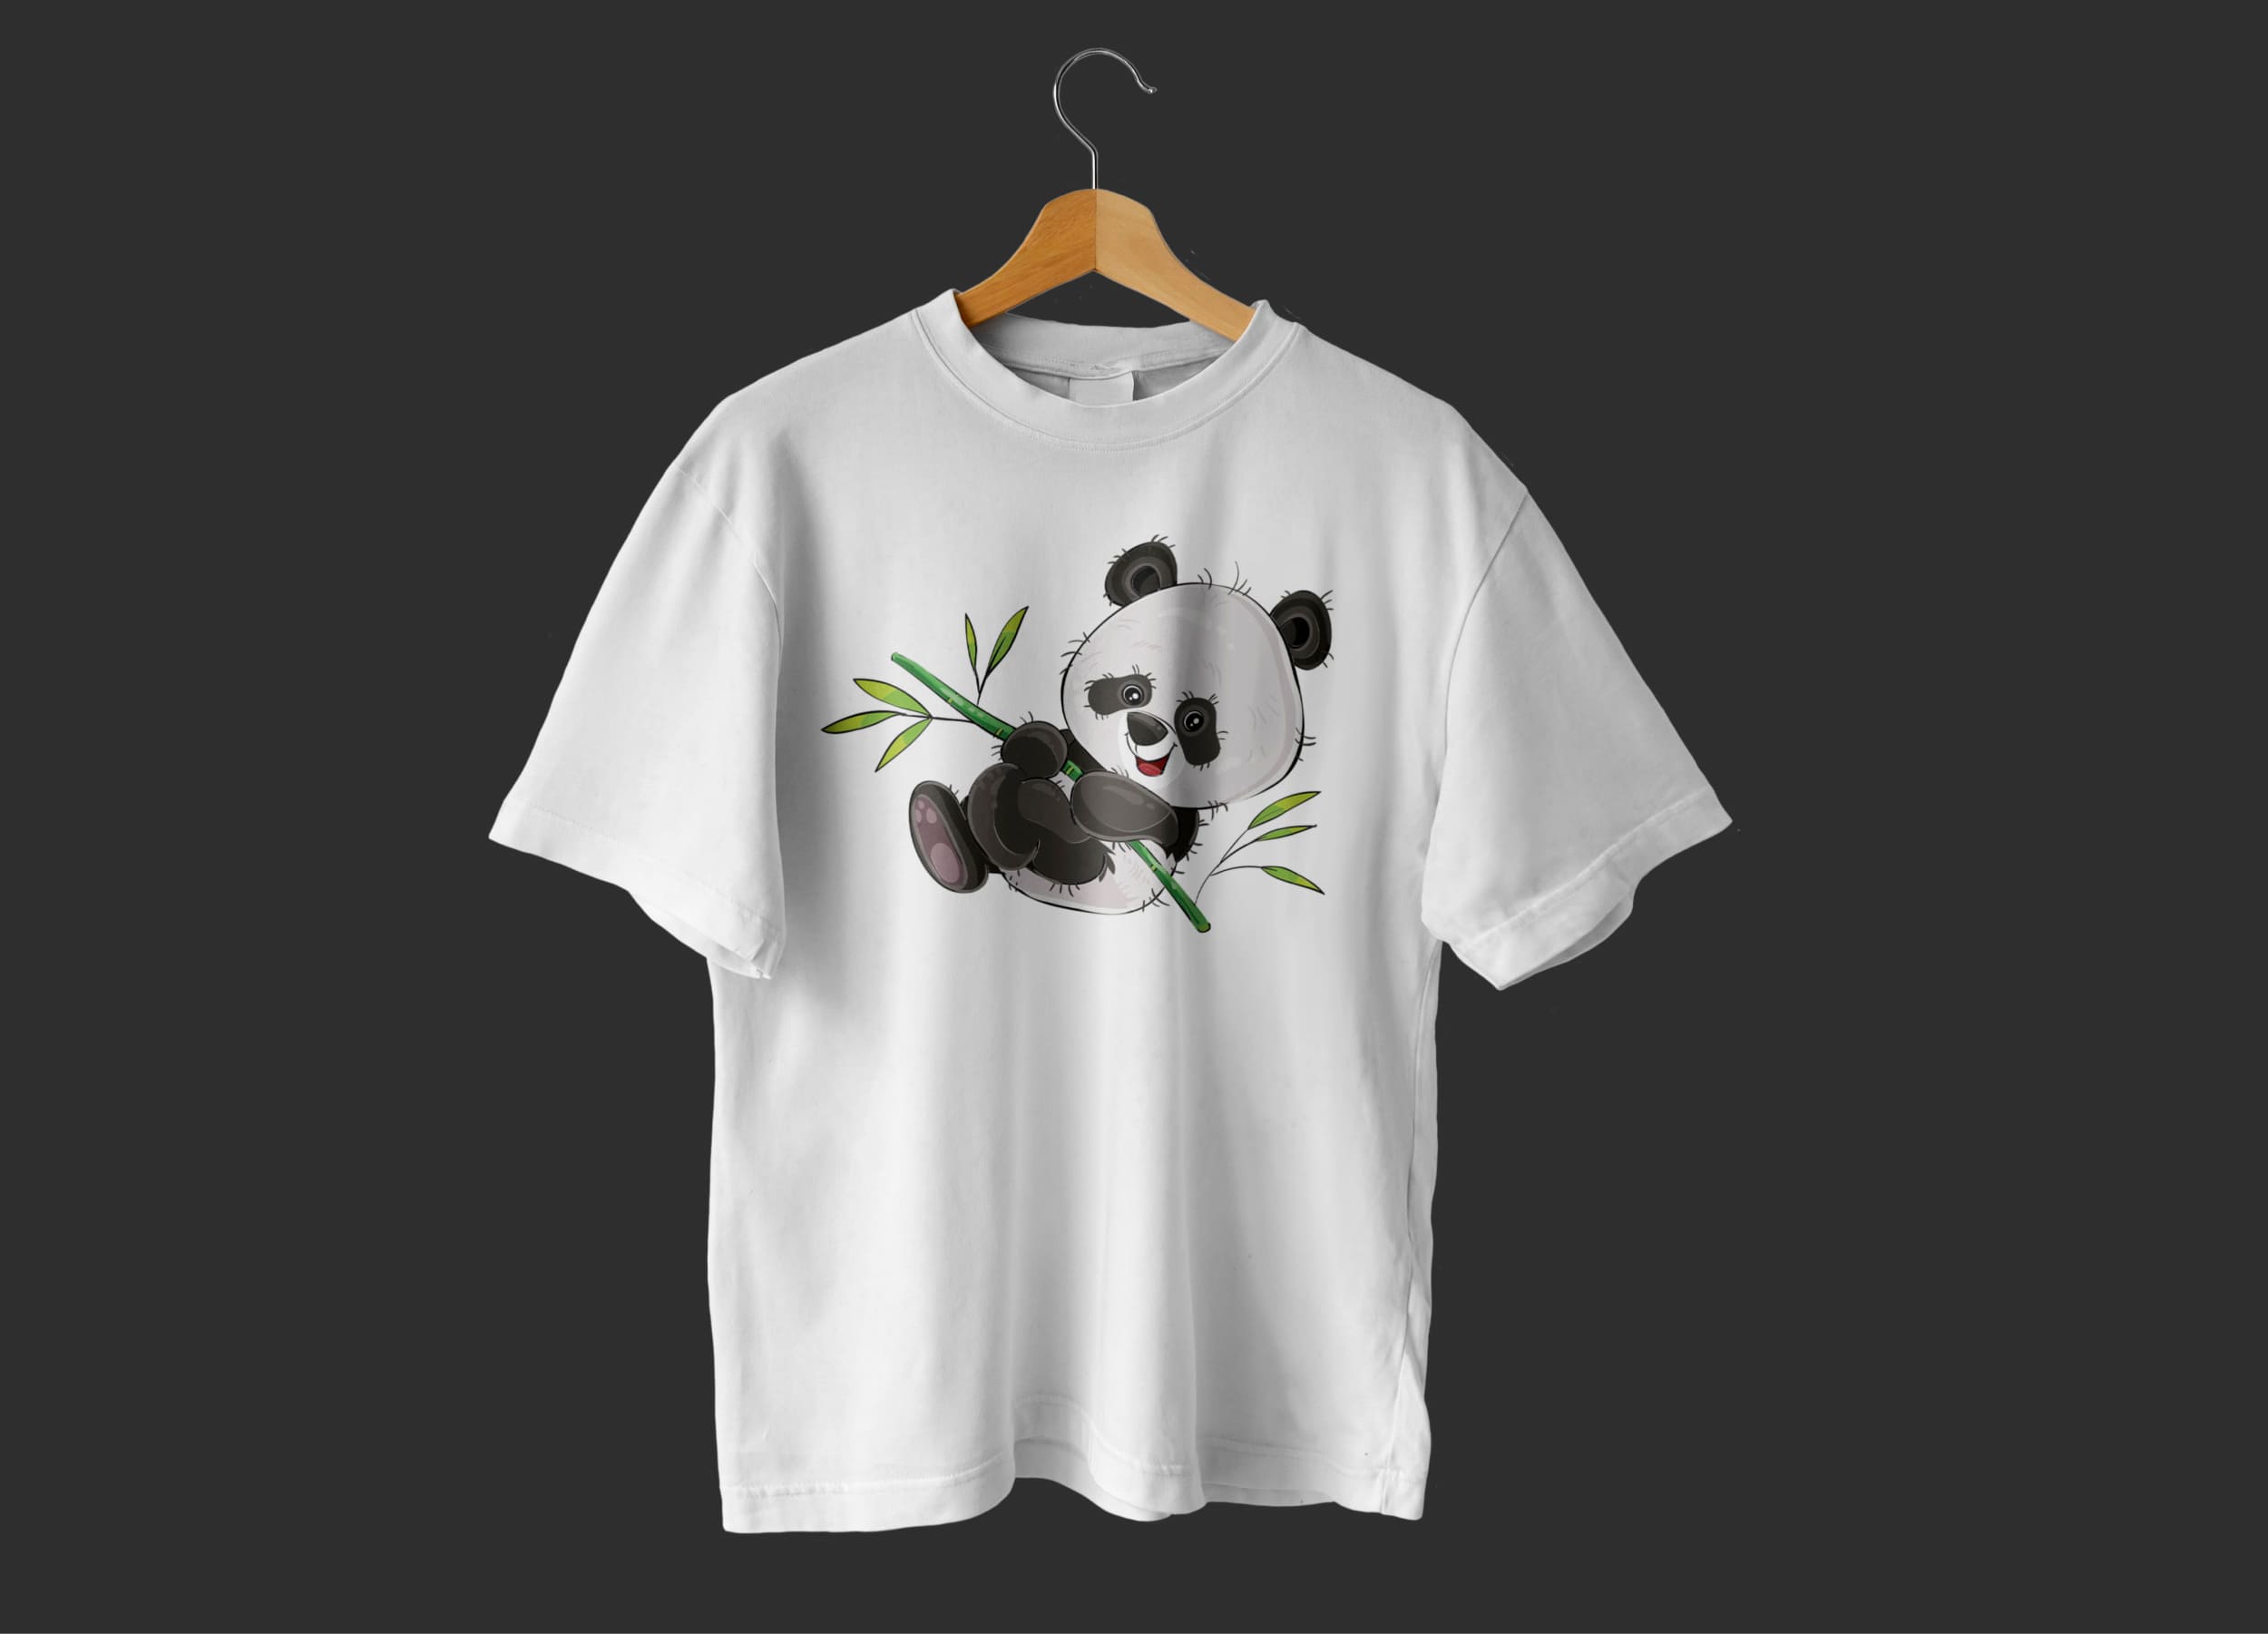 White t-shirt with a baby panda on a branch on a wooden hanger on a dark gray background.